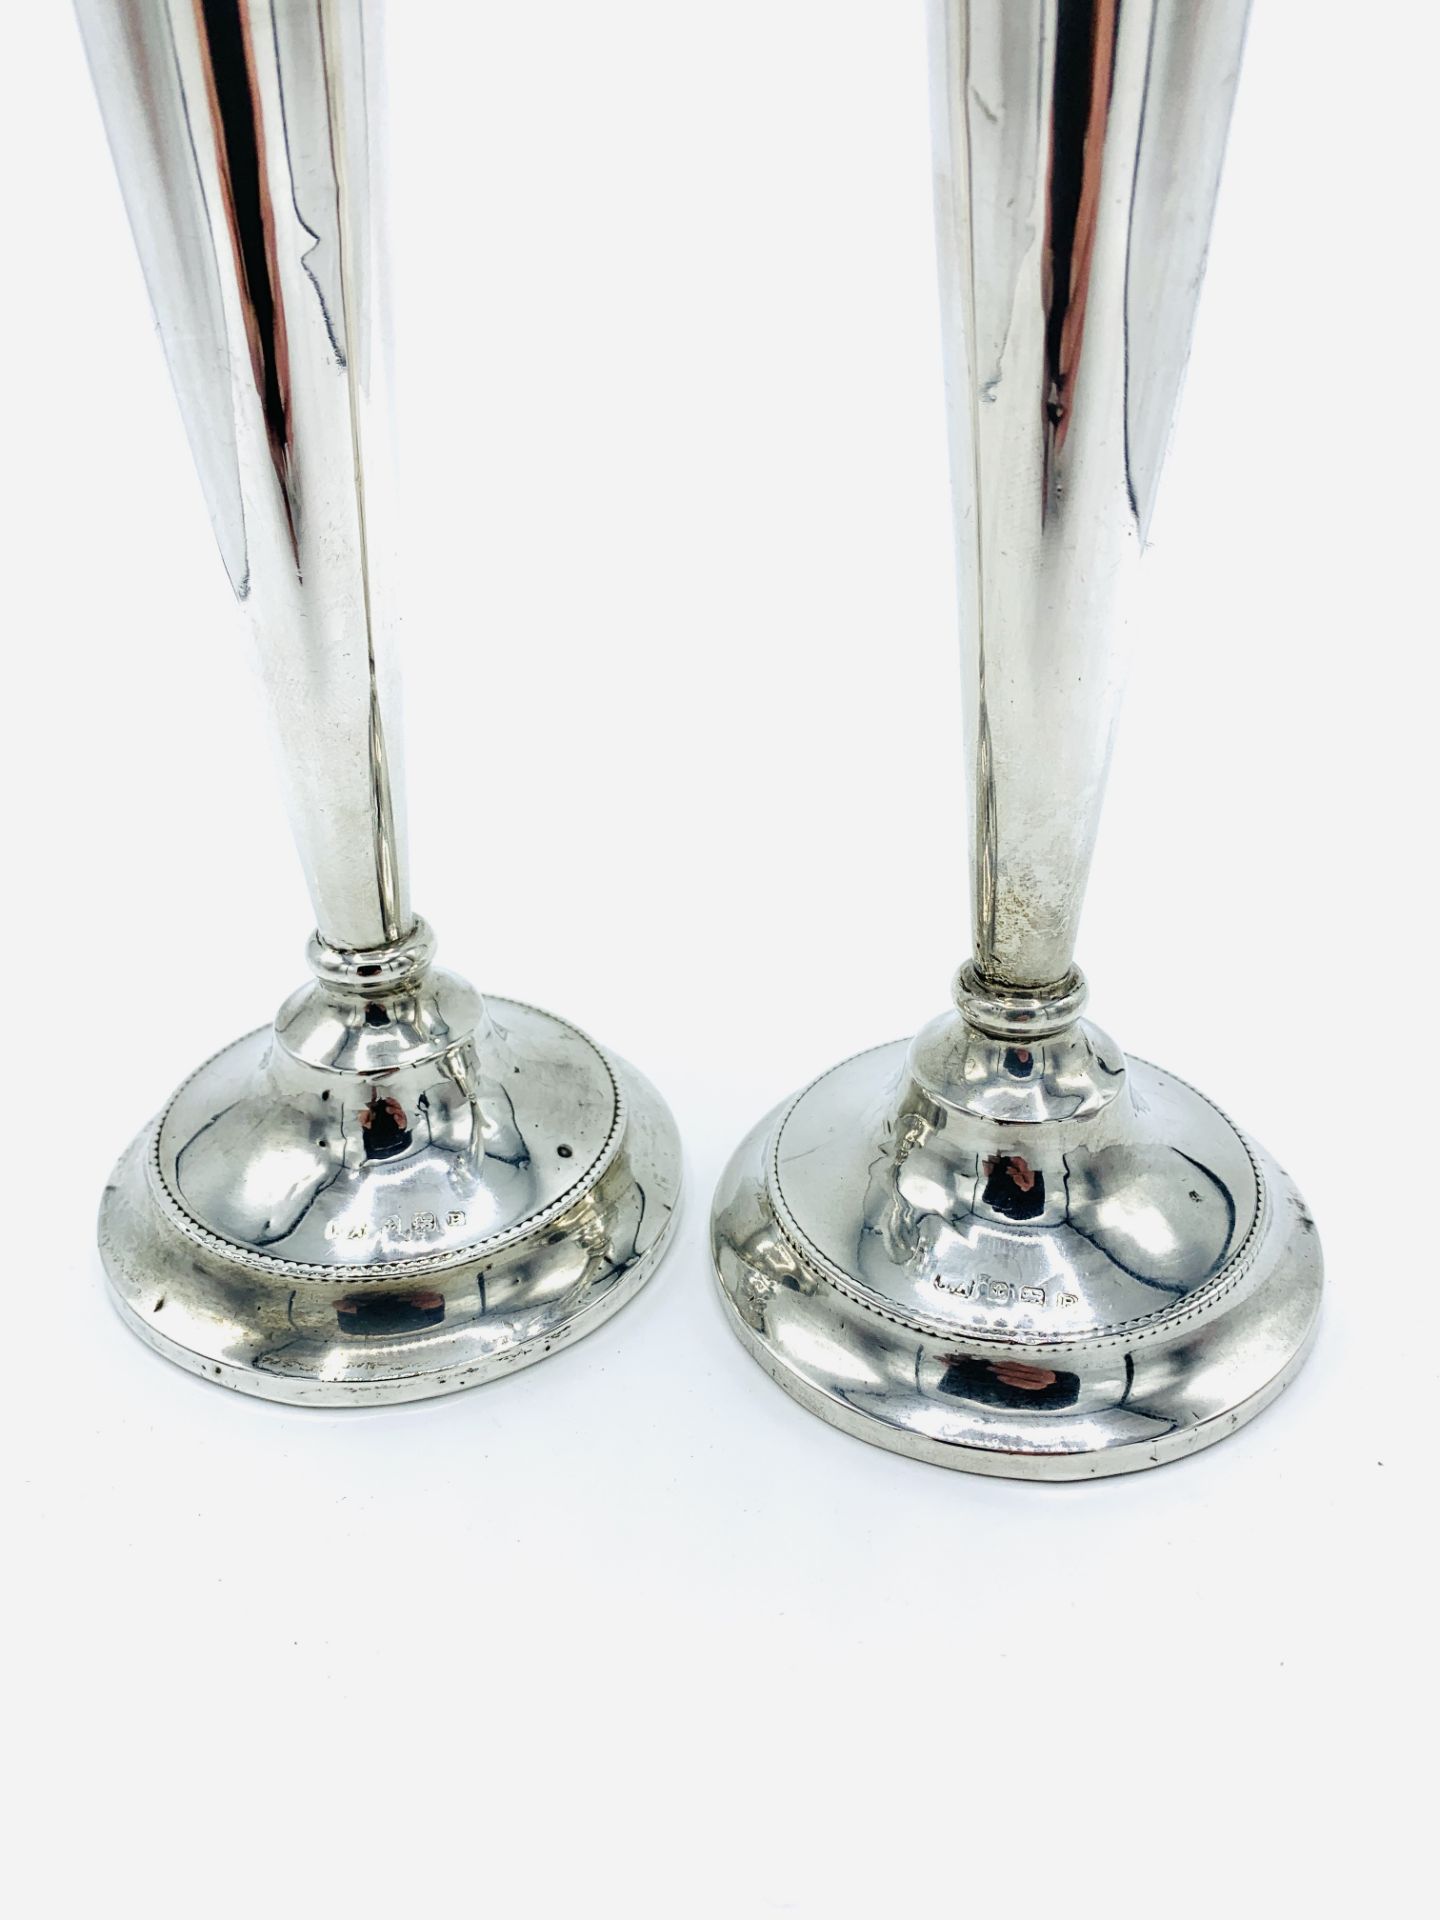 Pair of silver candlesticks. - Image 3 of 4